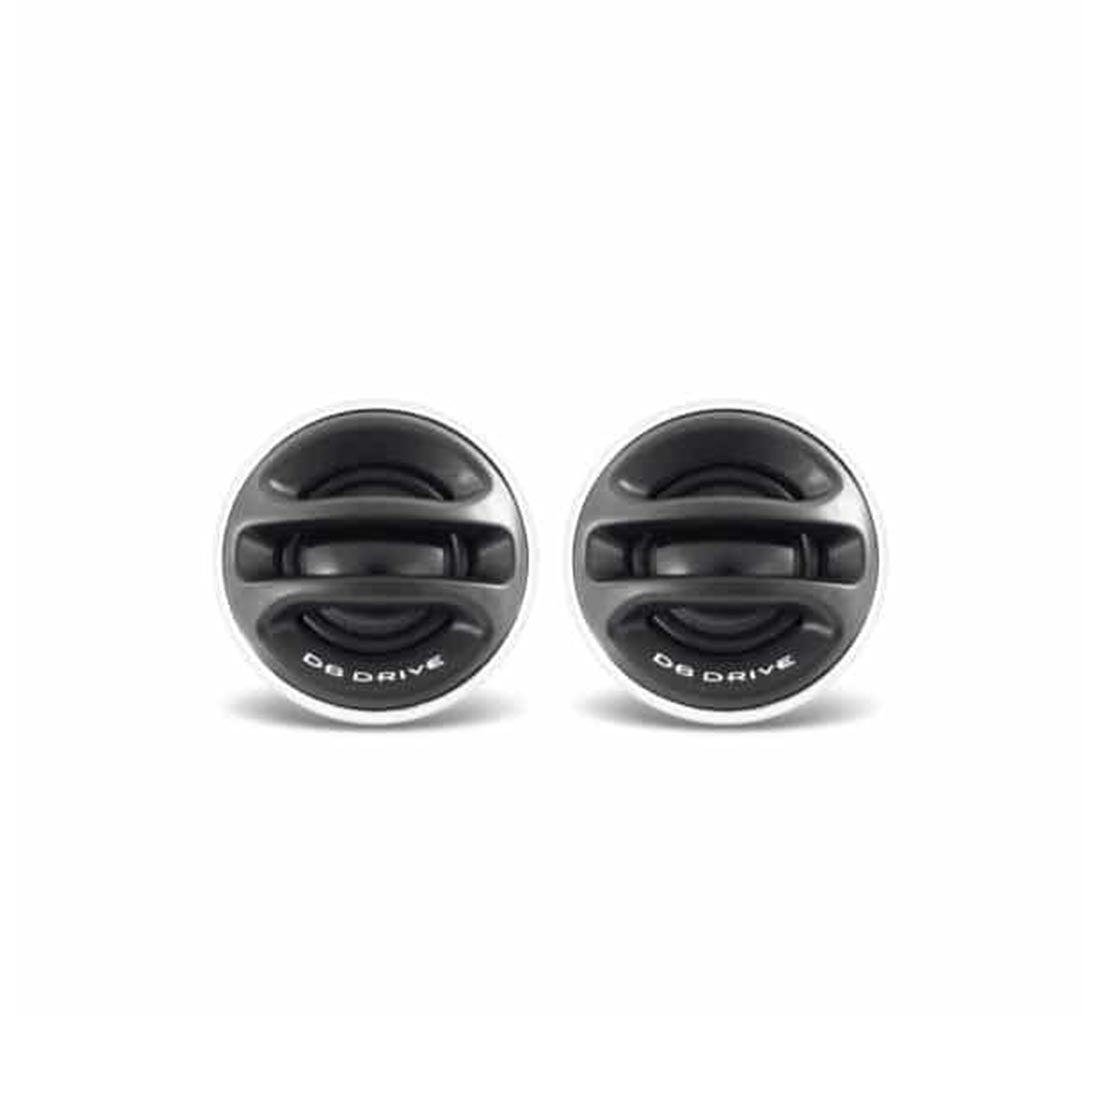 Euphoria EPC6K 6.5" 250W EPC Competition Component System Tweeters